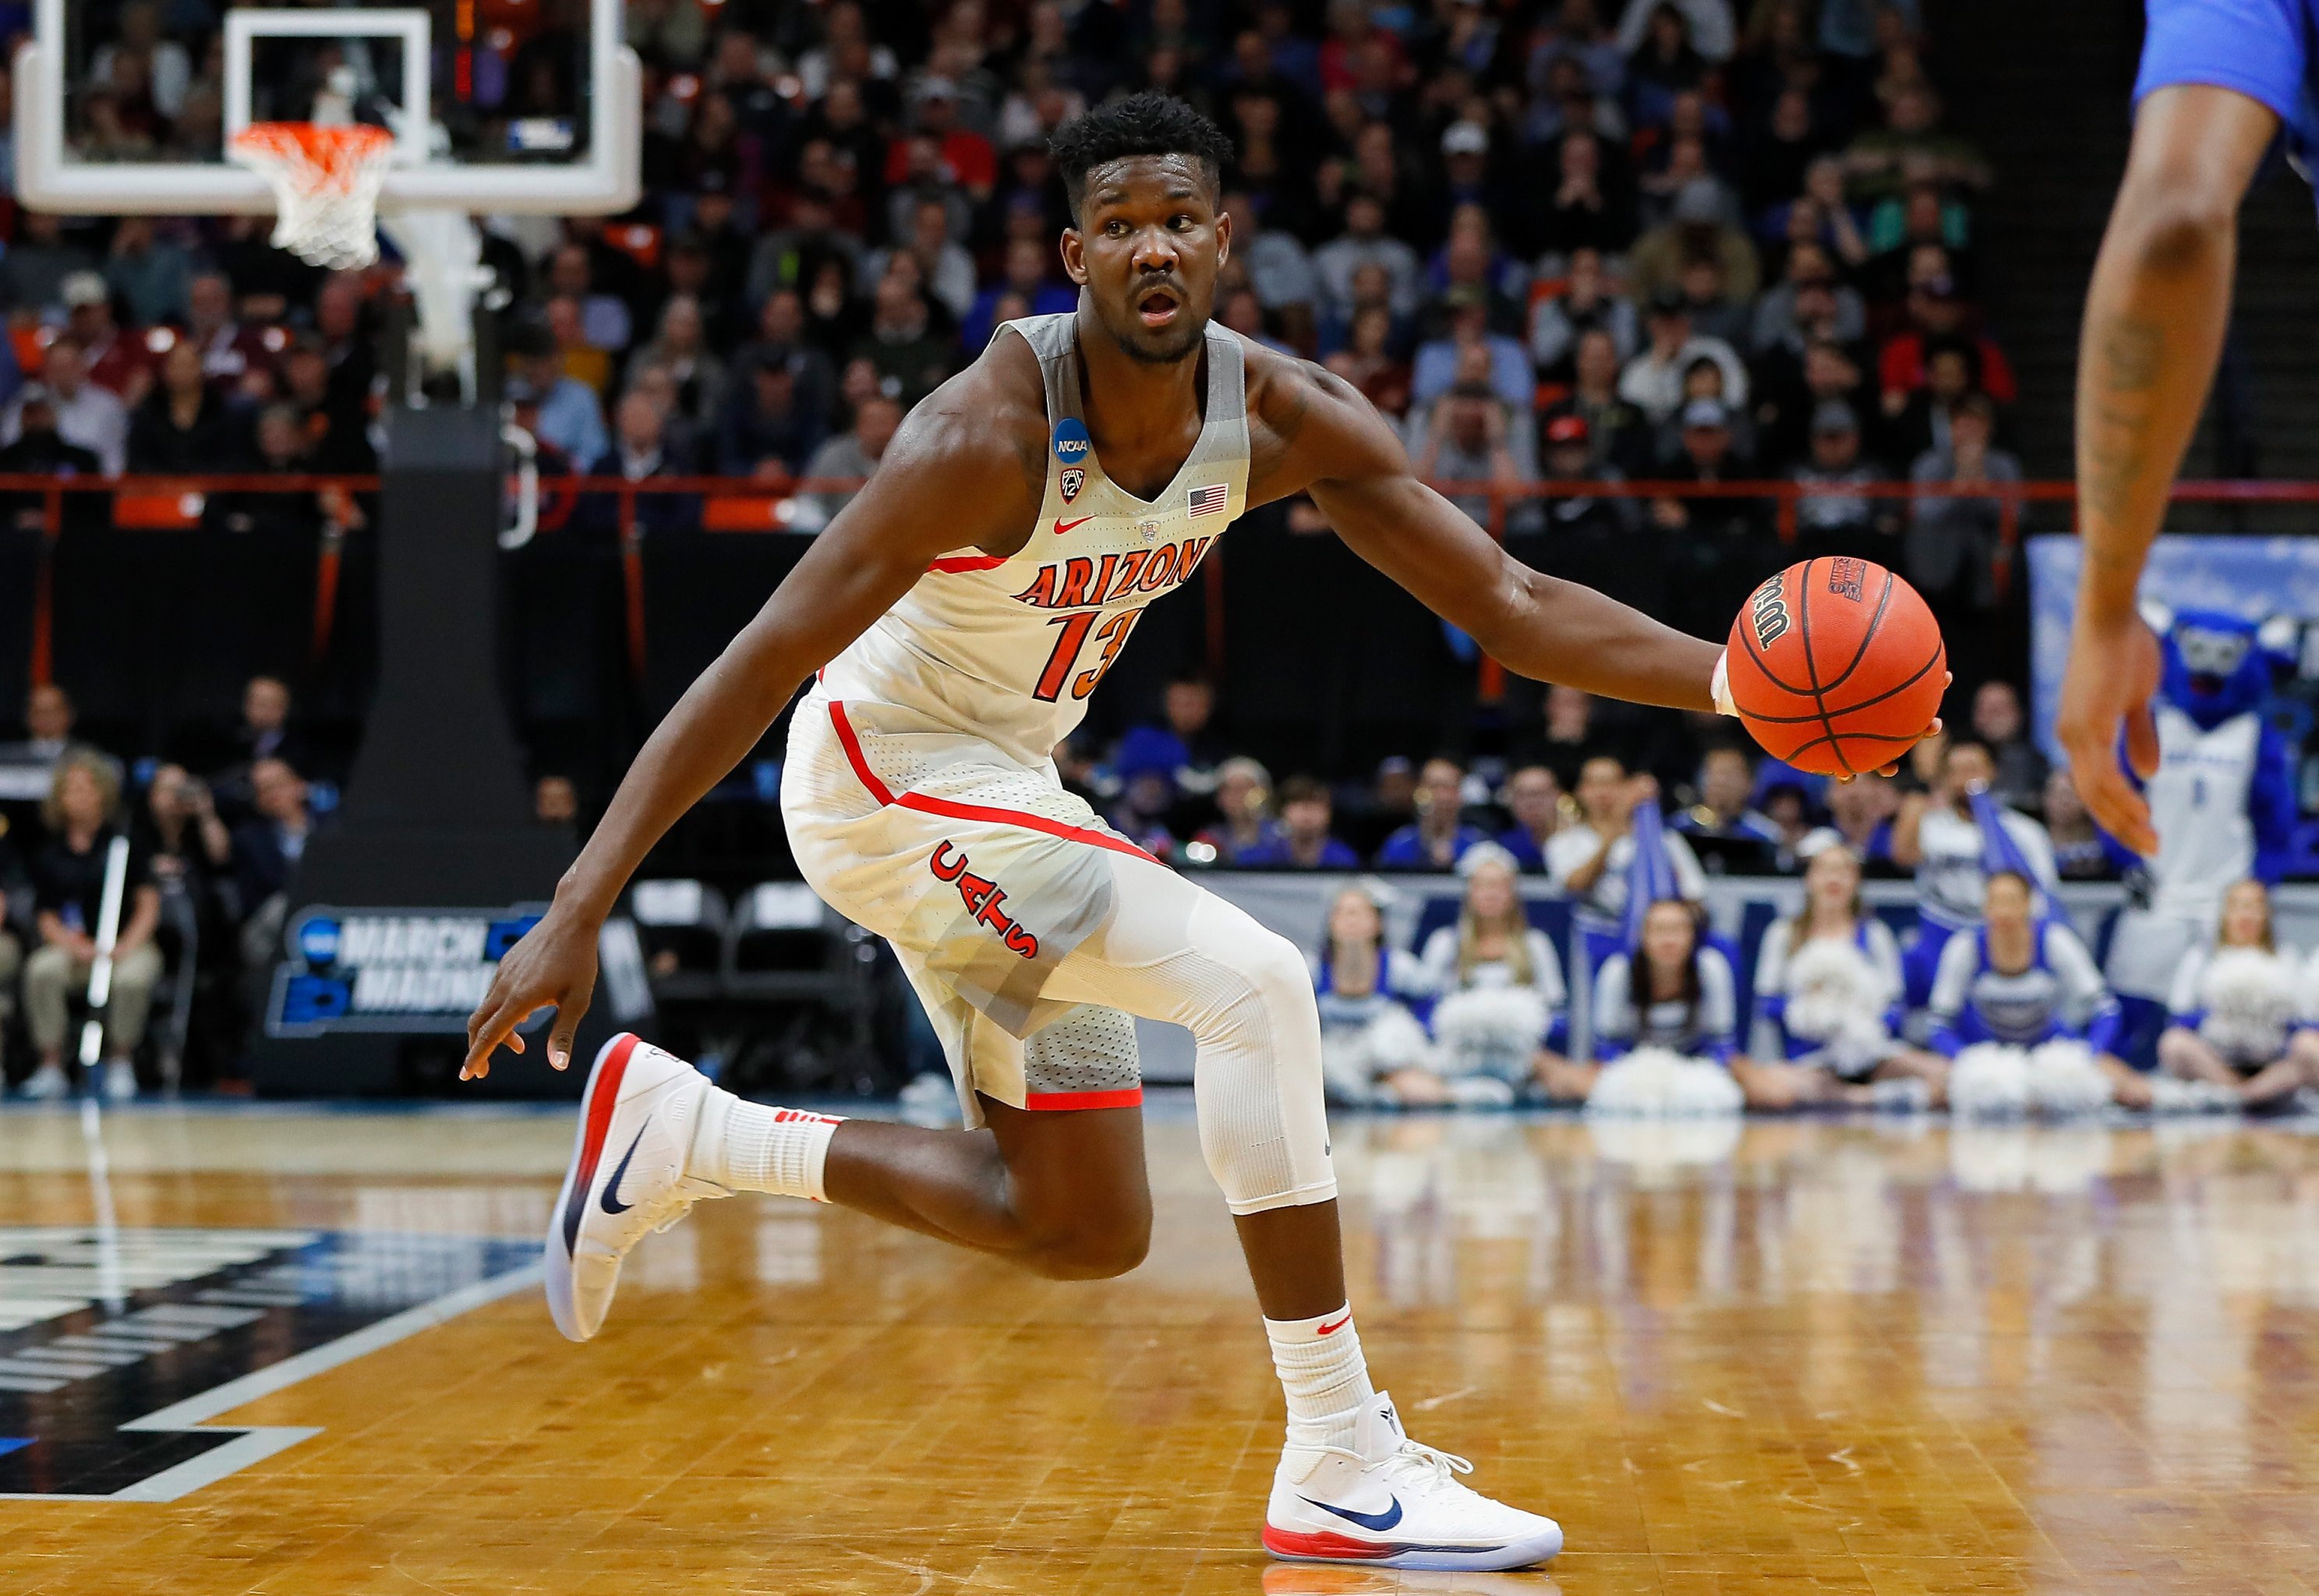 National writer: SMU PG Shake Milton one of country's top 100 players